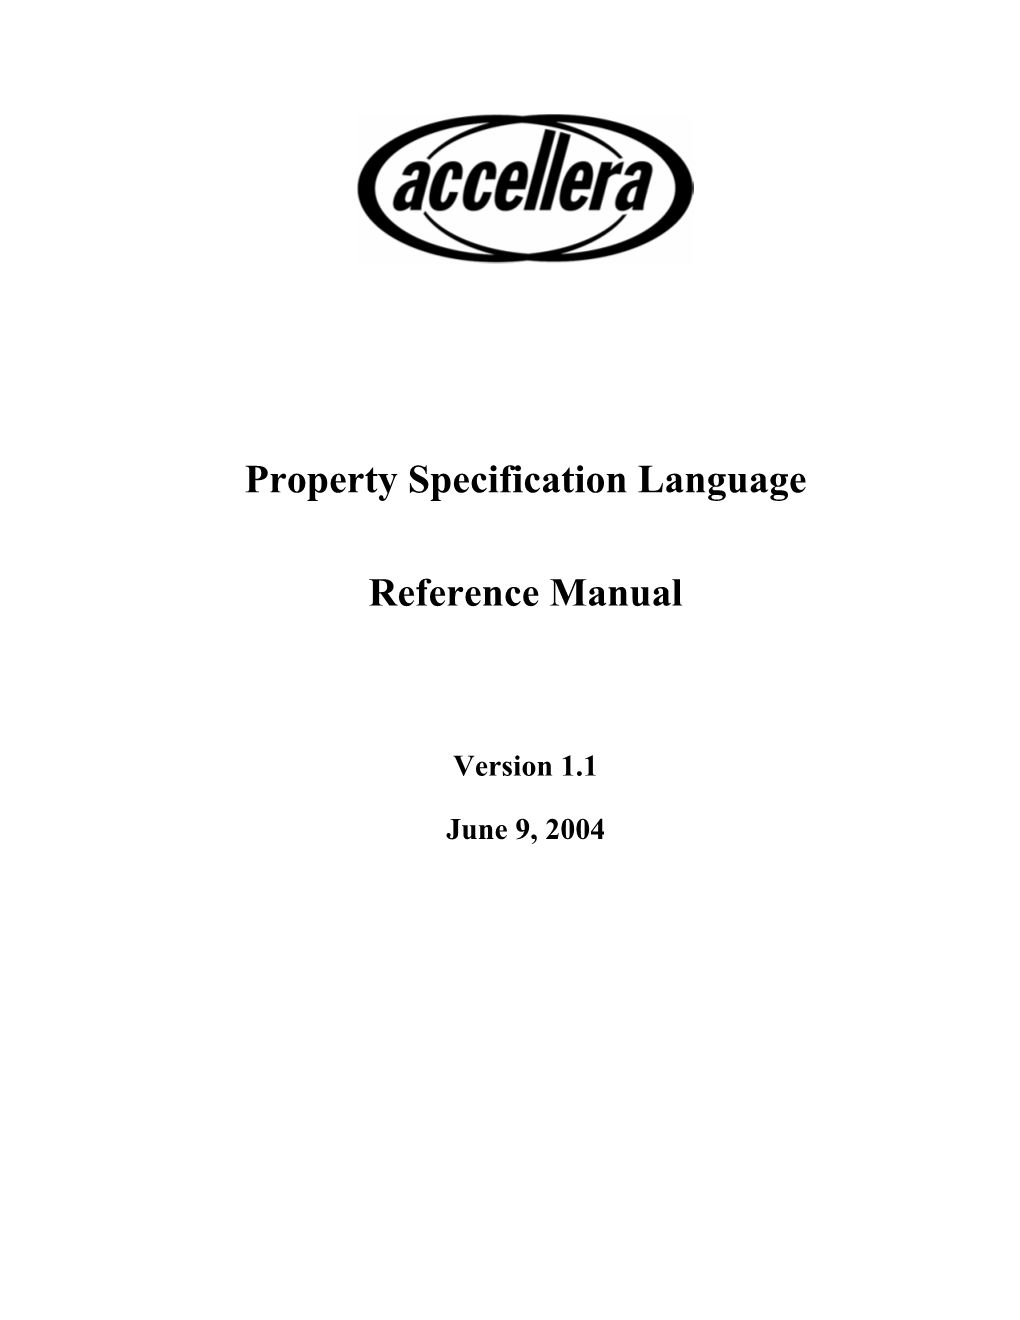 Property Specification Language Reference Manual